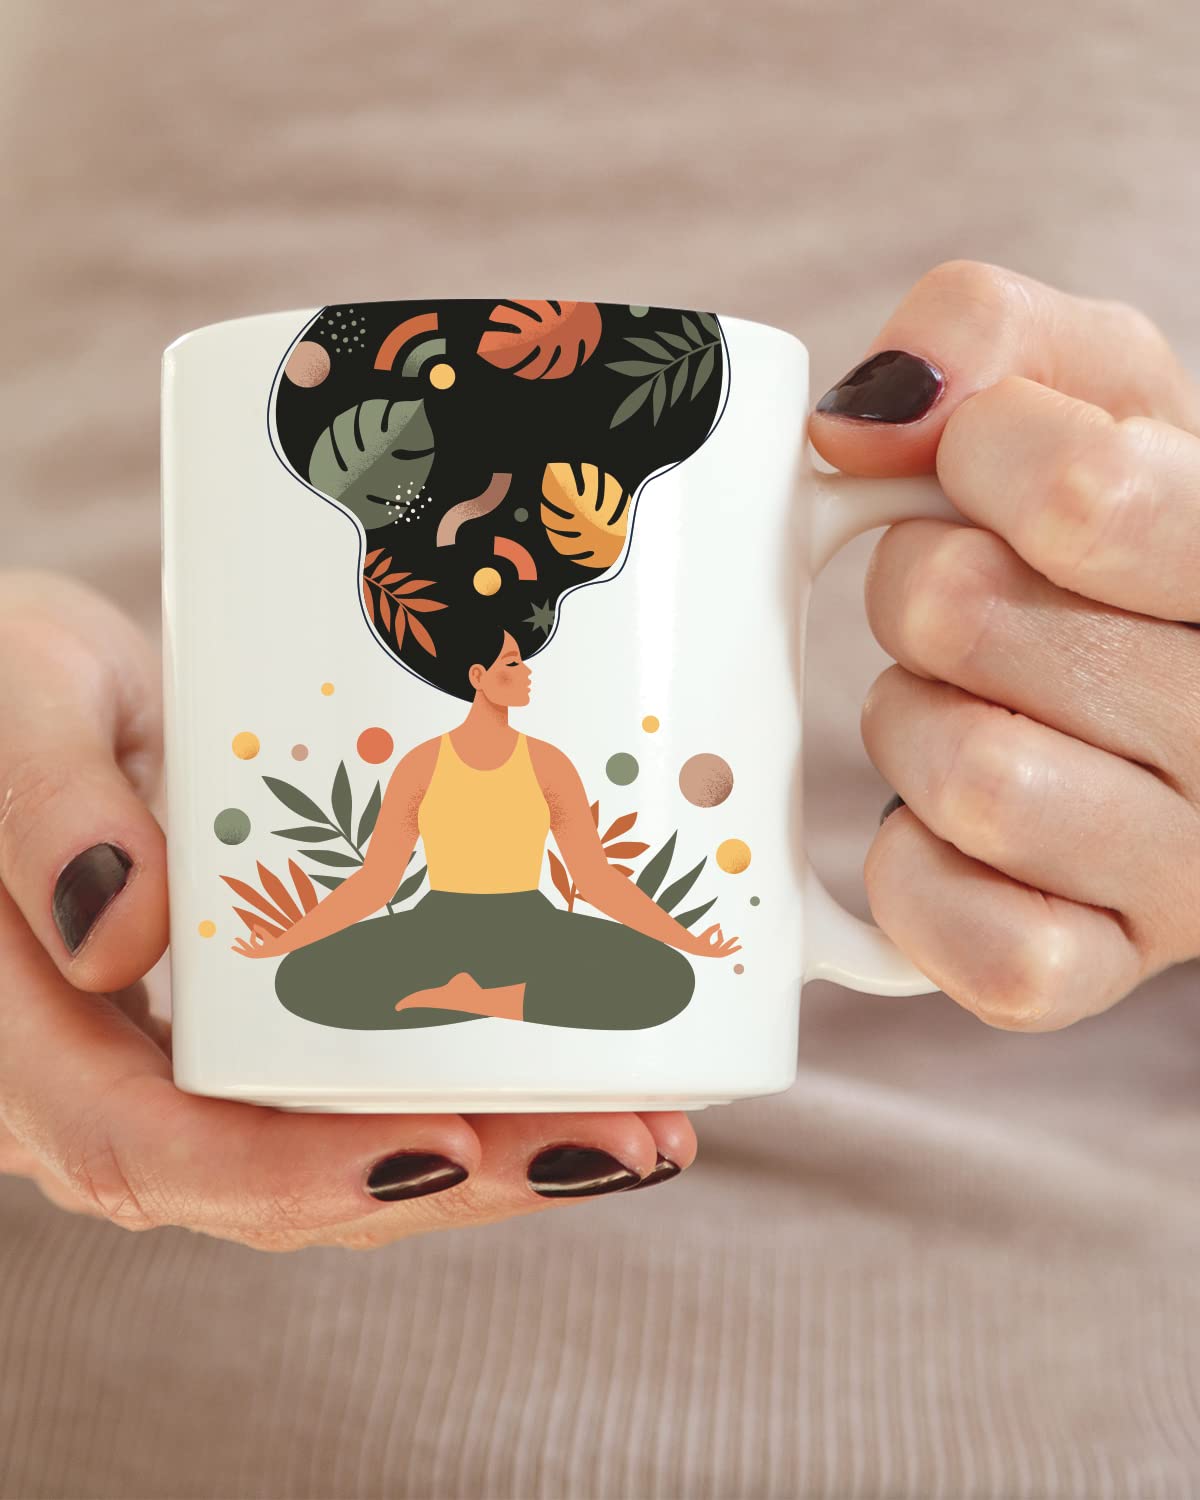 Girl in Zen Mode Coffee Mug - Birthday Gift, Motivational Mug, Printed with Inspiring Quotes, Positivity Mug, Inspirational Gift for Her, Best Friend Gift, Gifts for Her, Cheer Up Gift